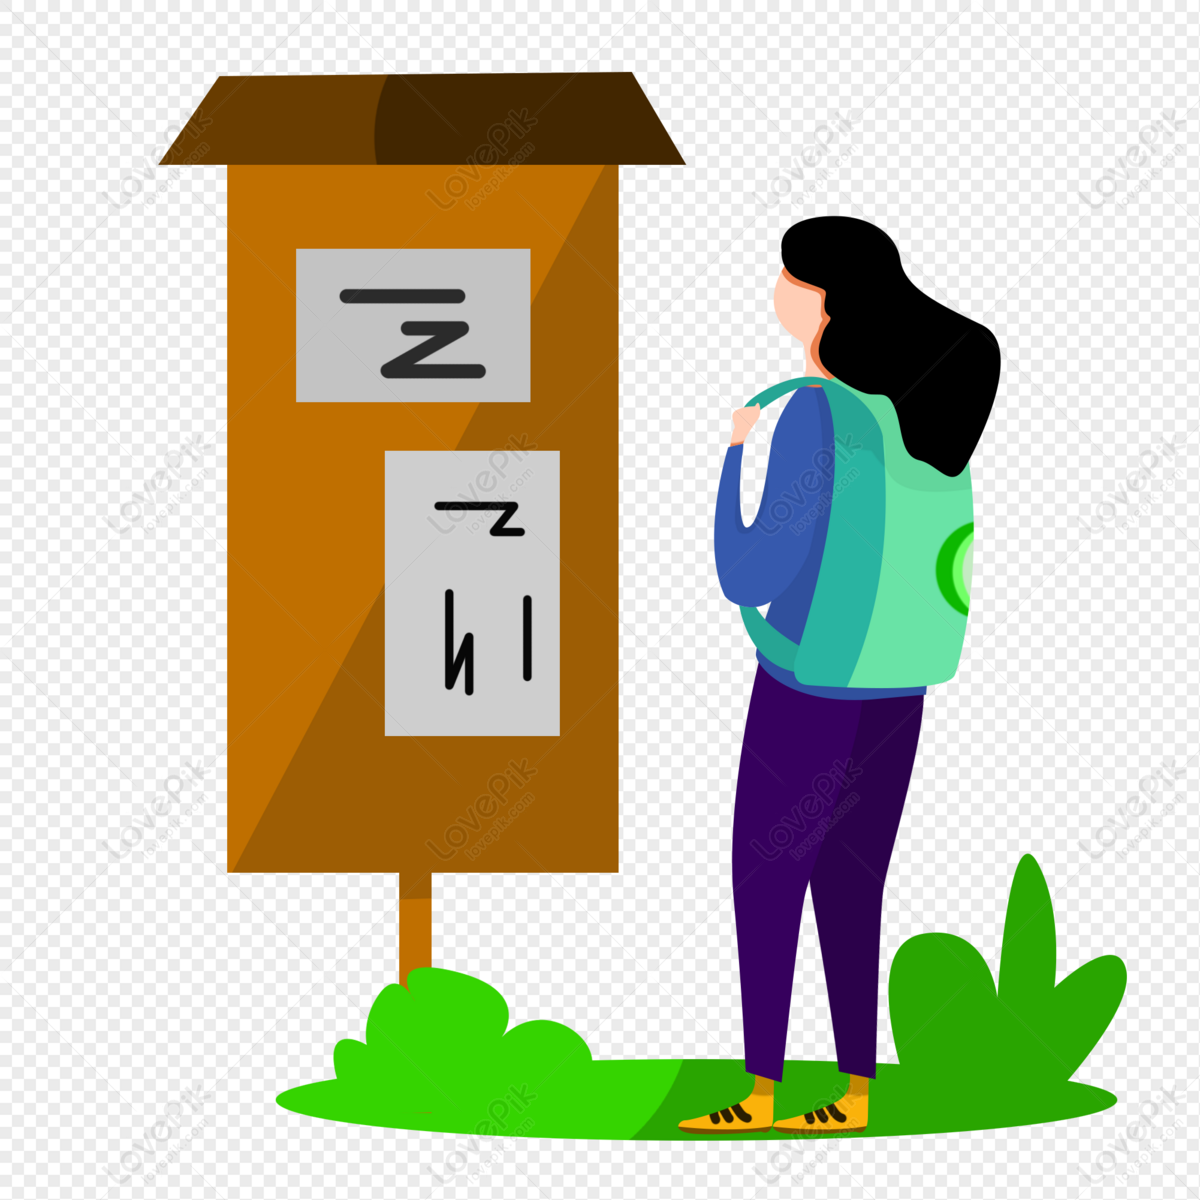 school locations images clipart